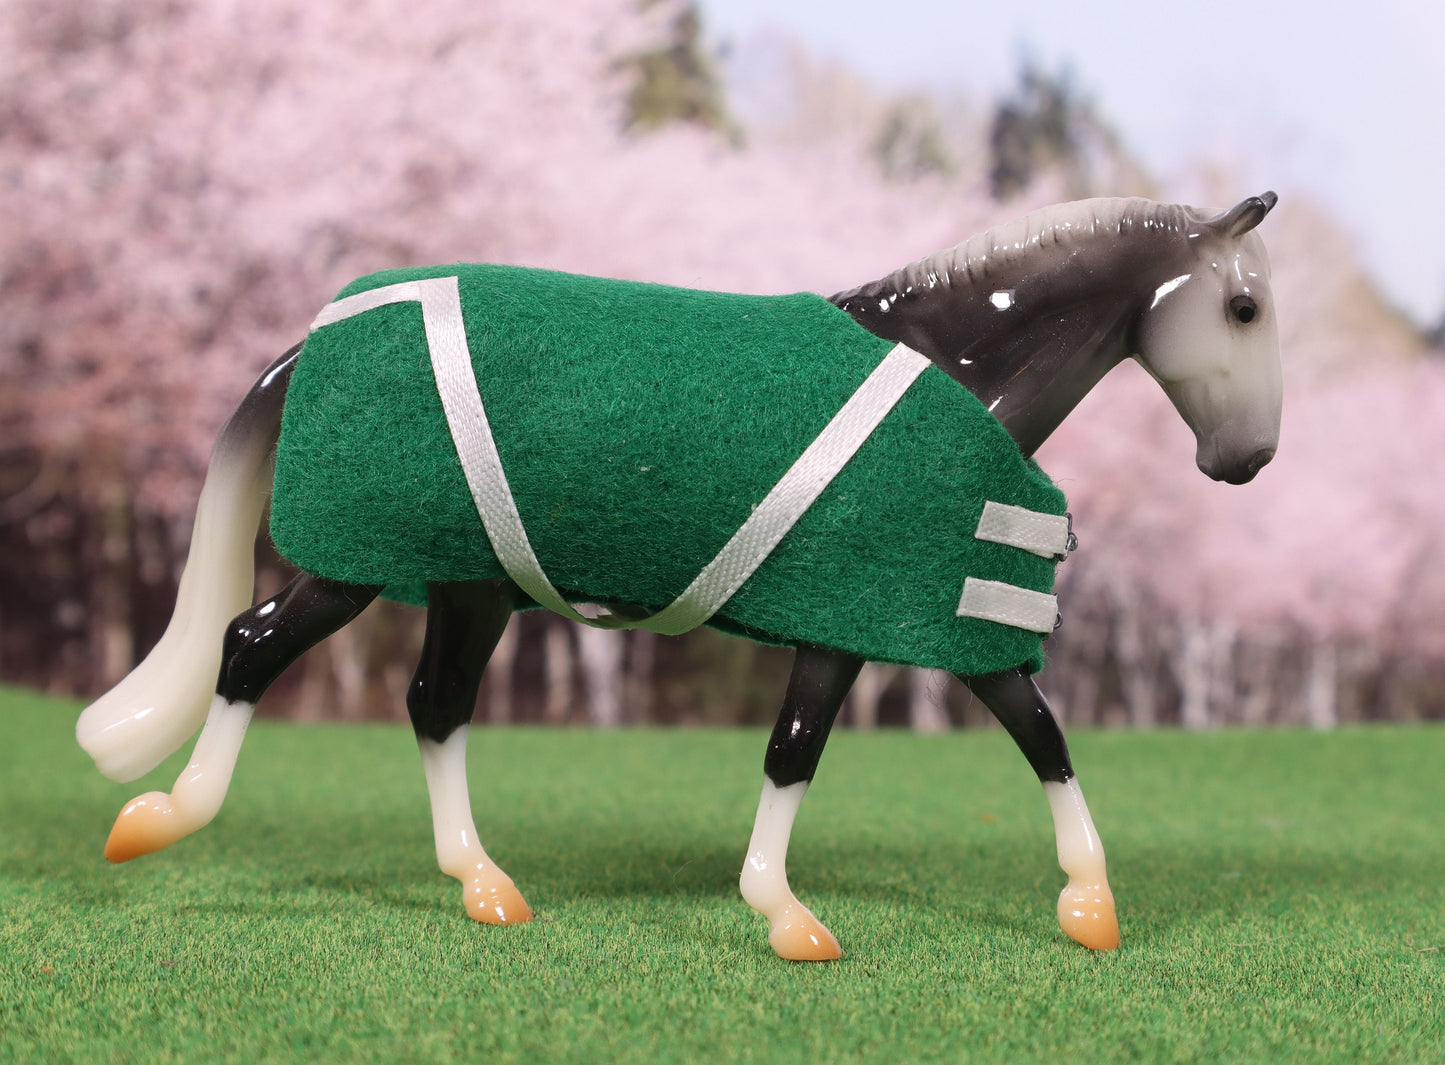 Green and White Stable Blanket for Breyer Stablemates Model Horses - Made for Irish Draft Mold